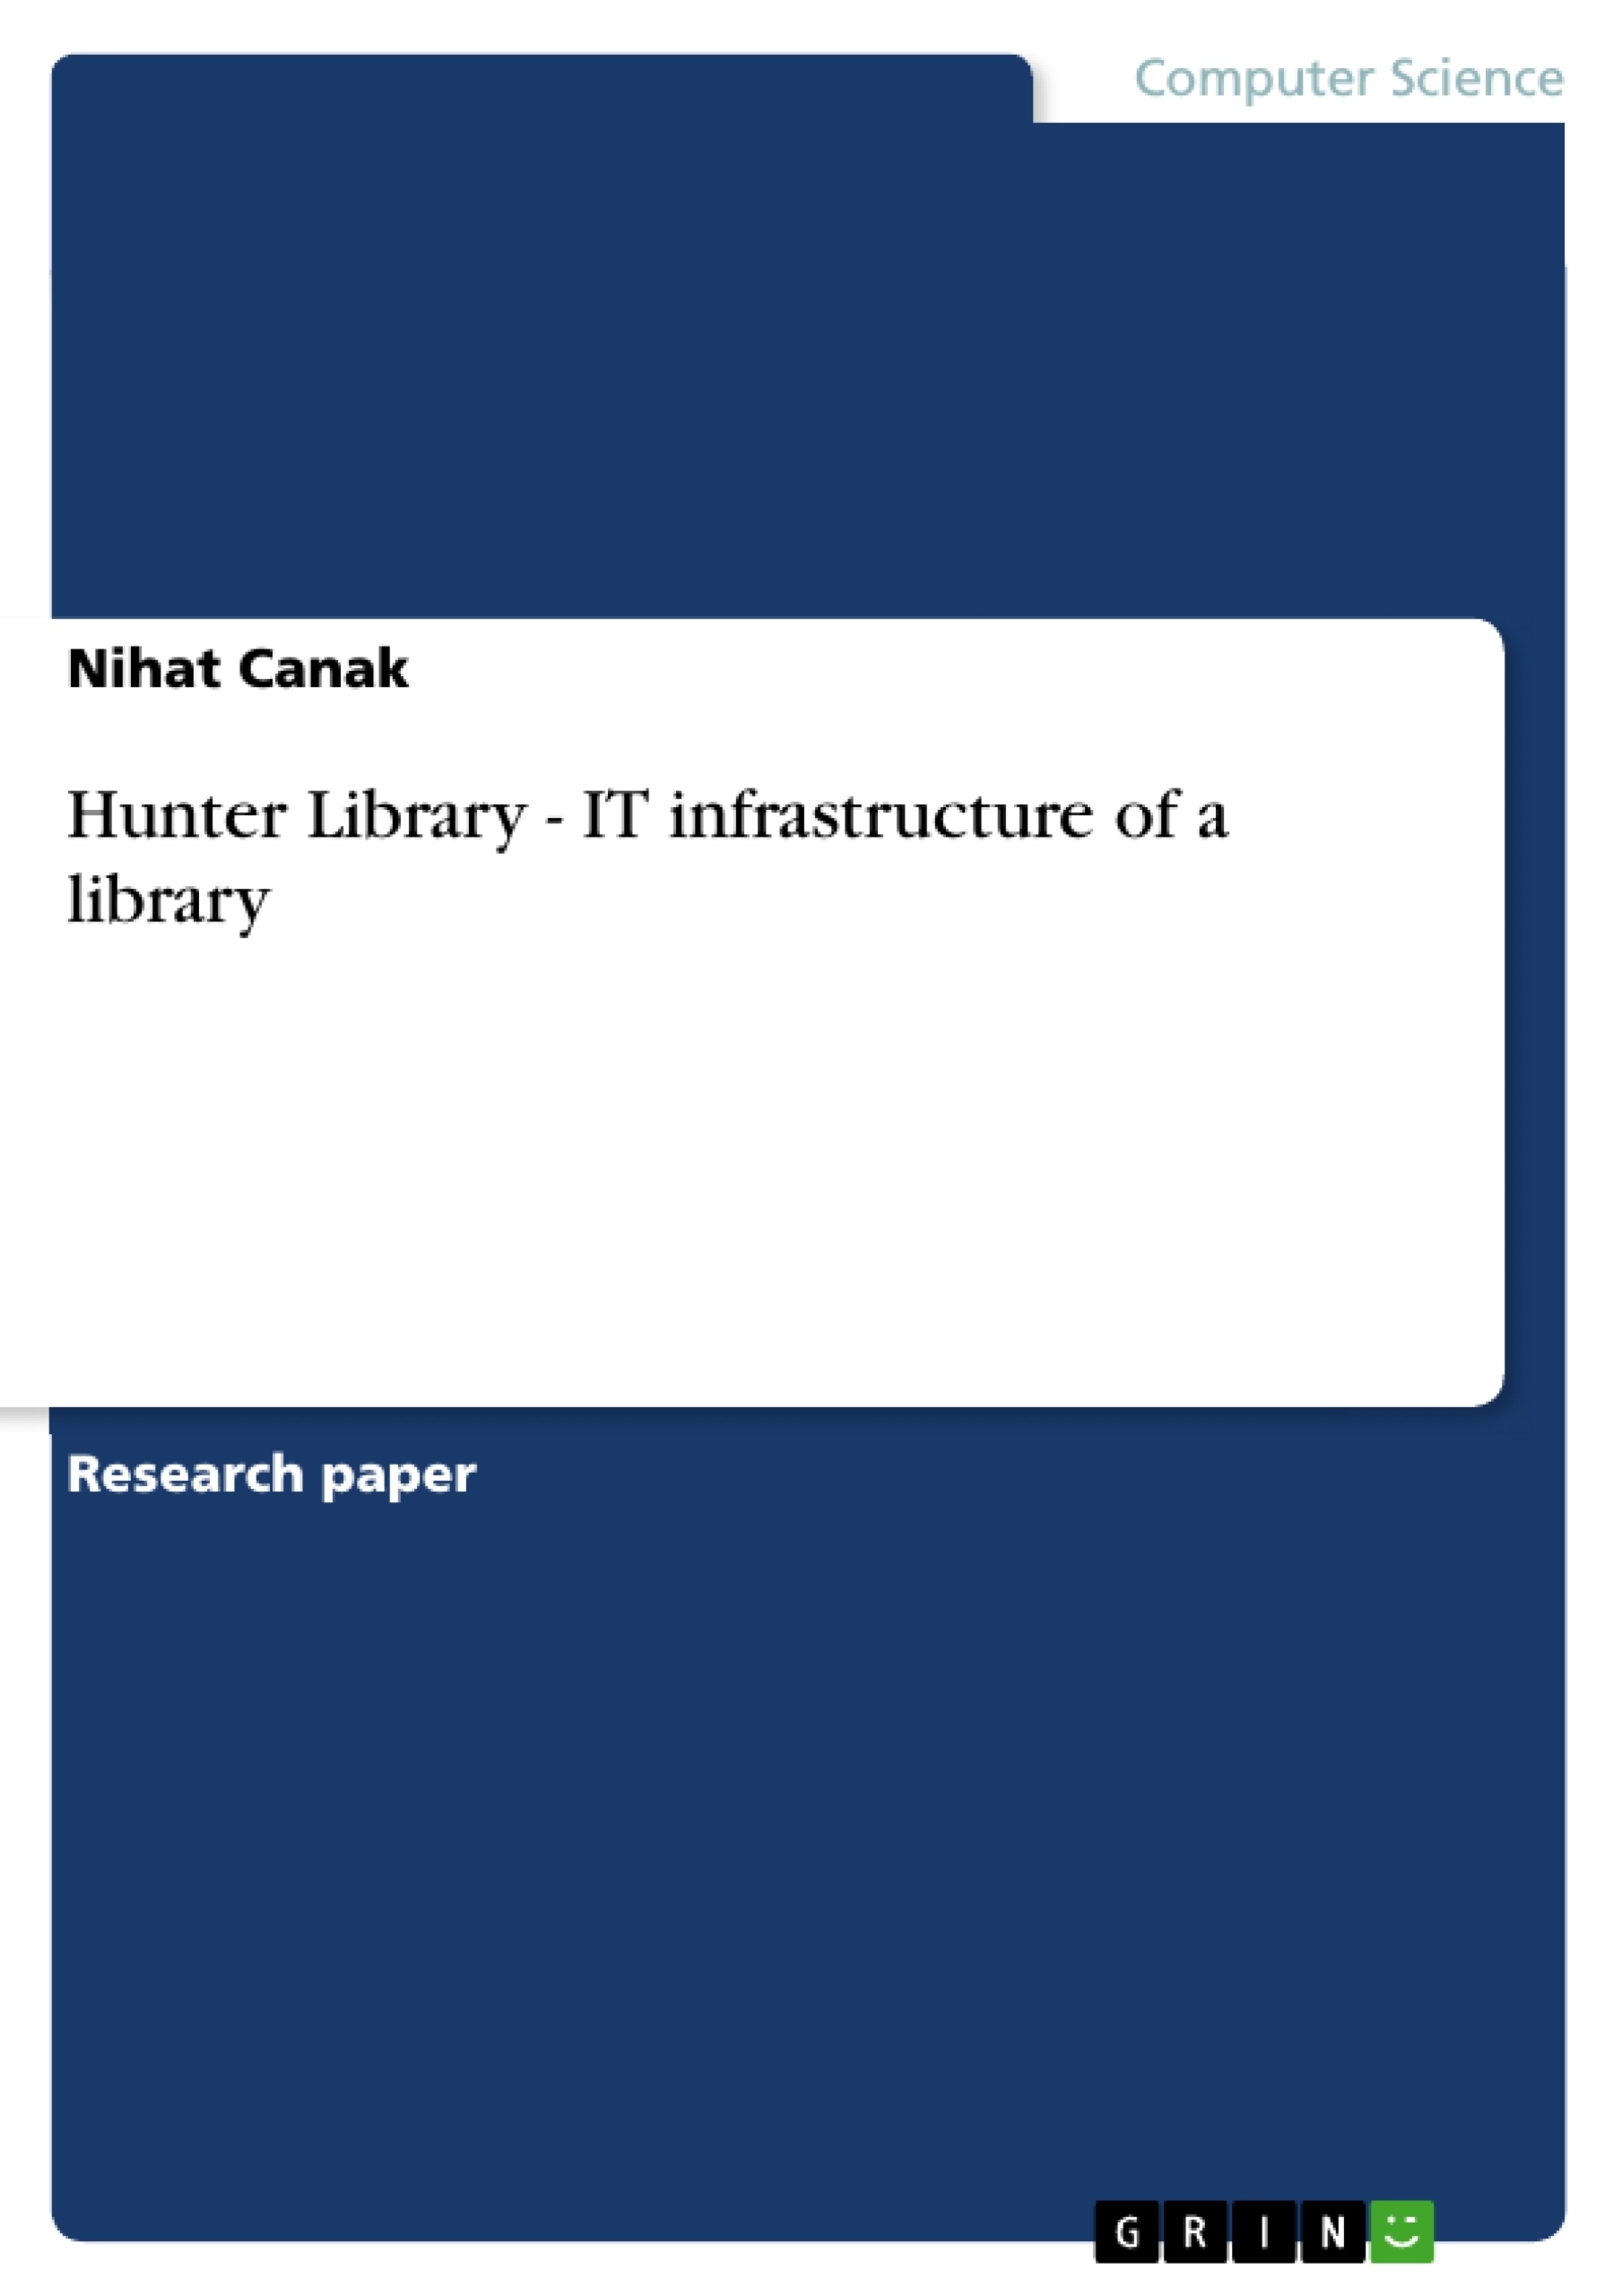 Título: Hunter Library - IT infrastructure of a library